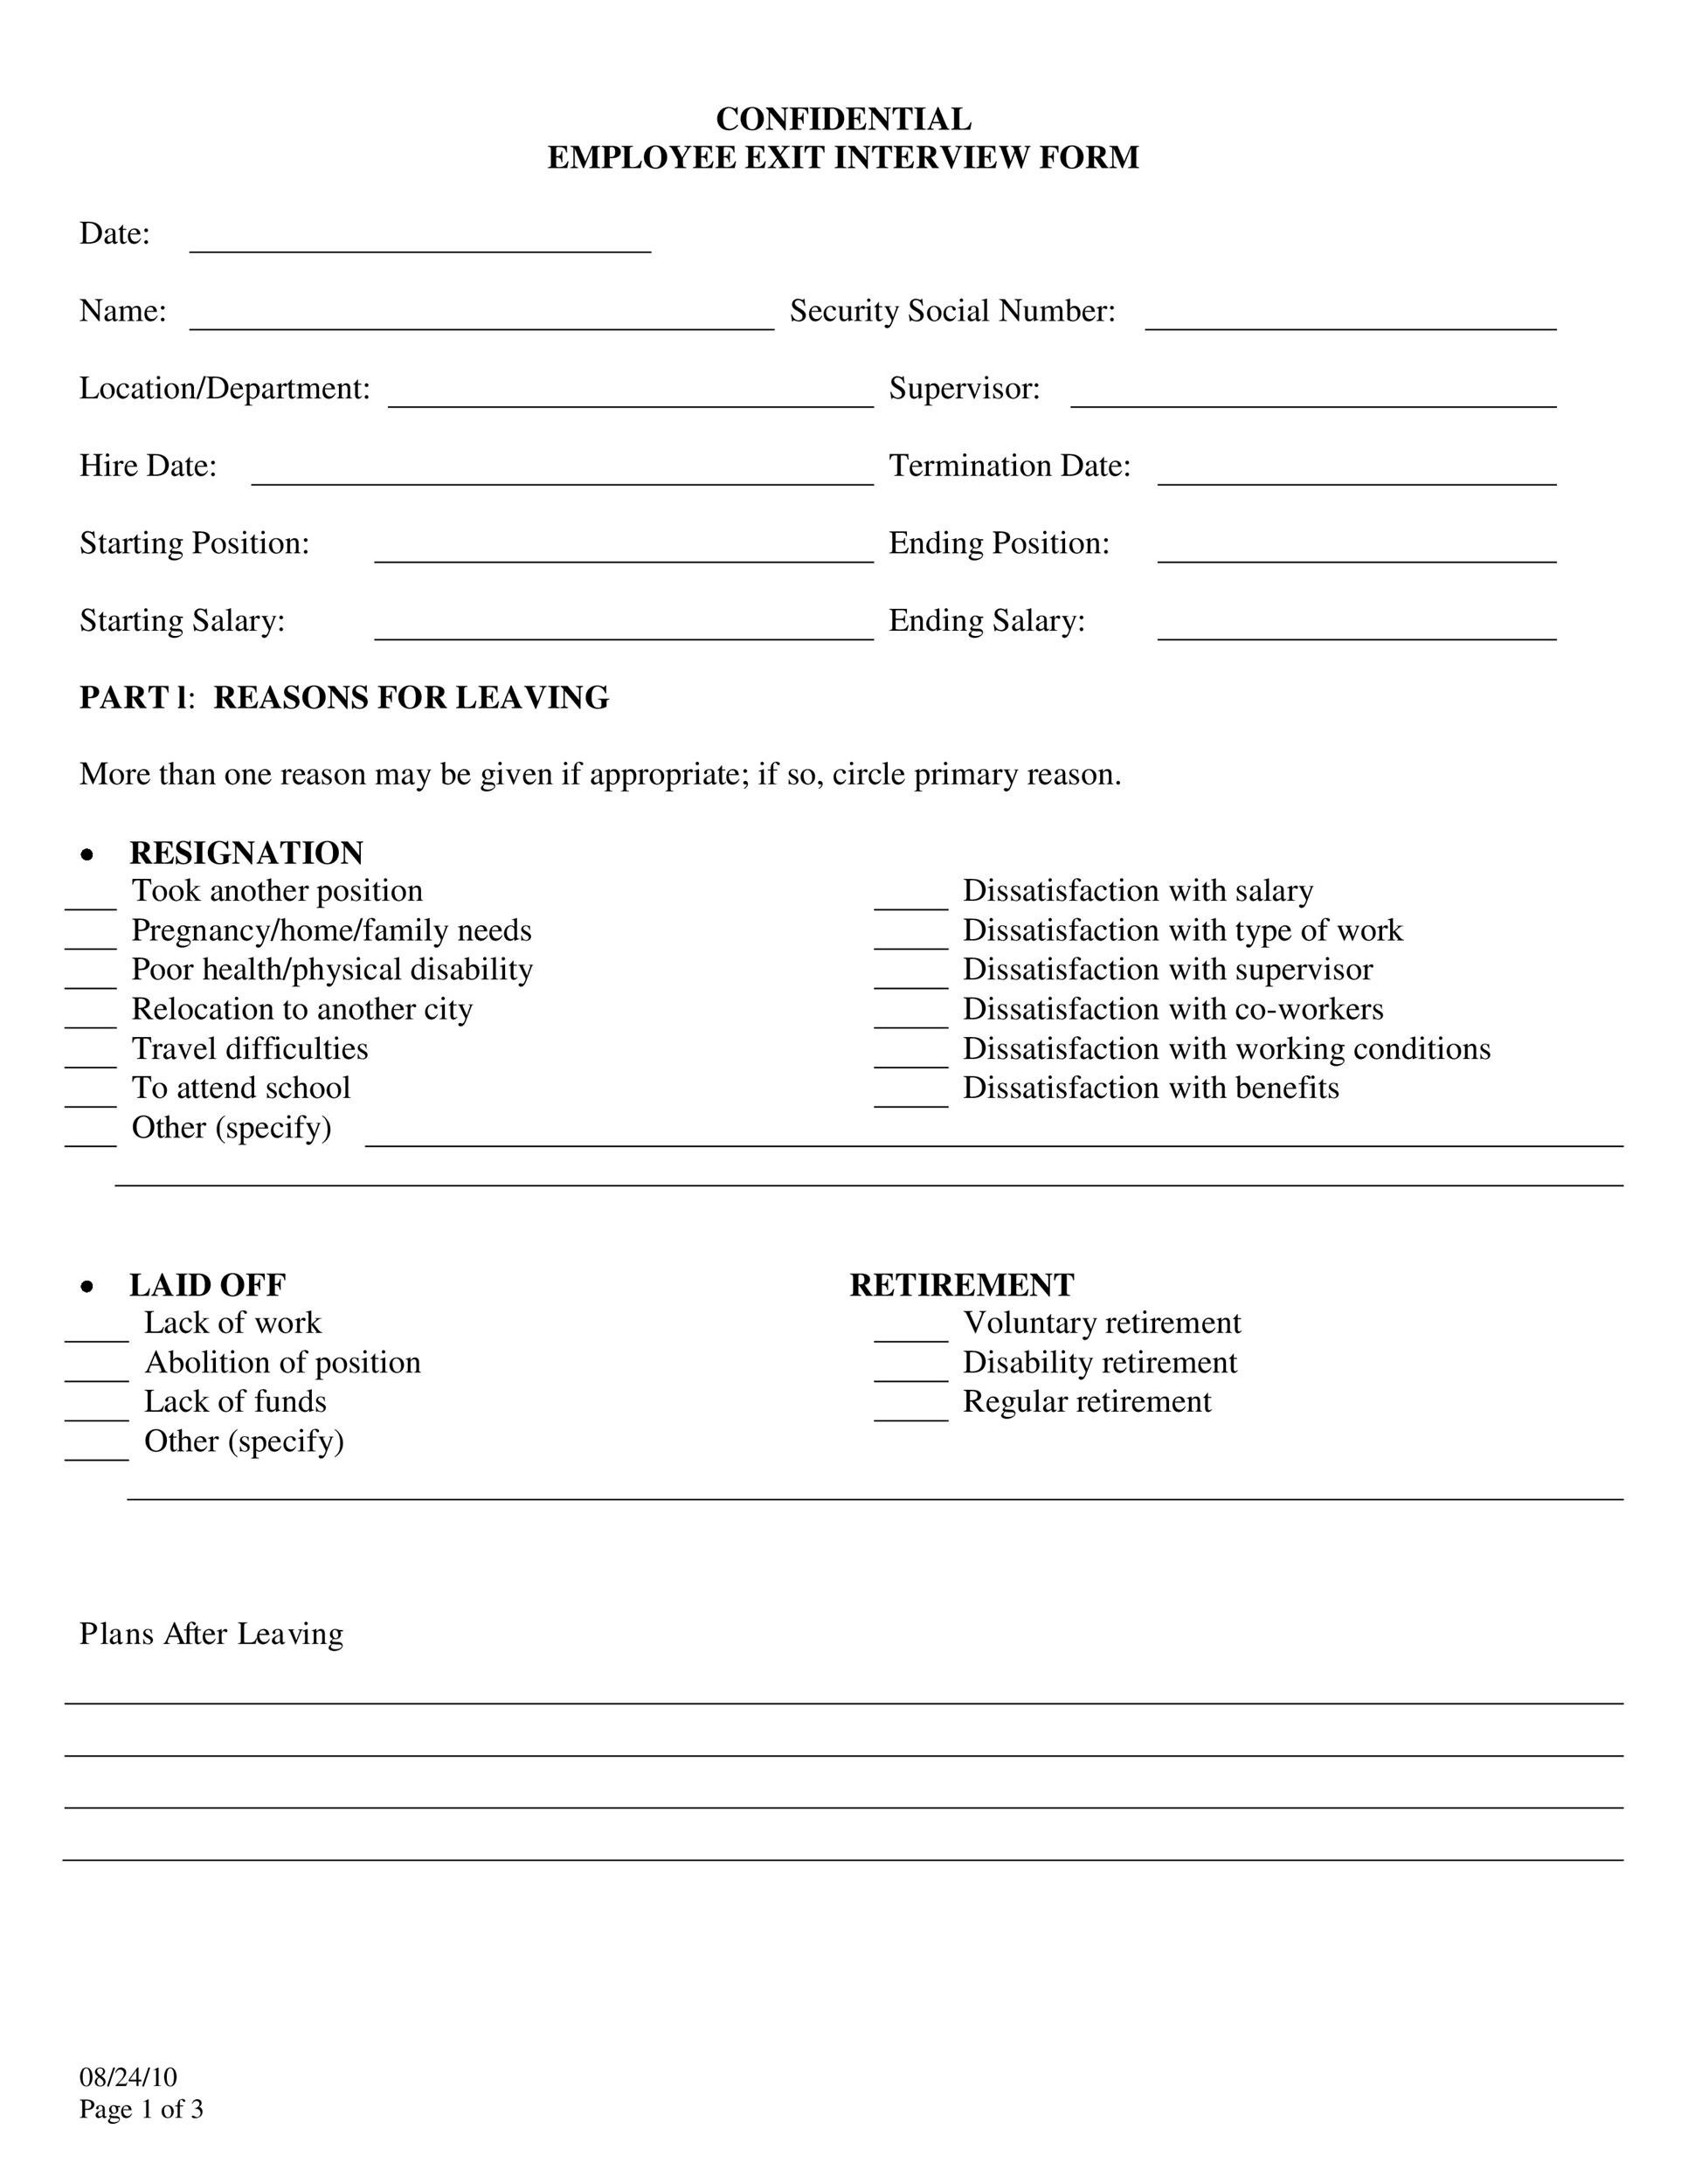 Free exit interview template 06